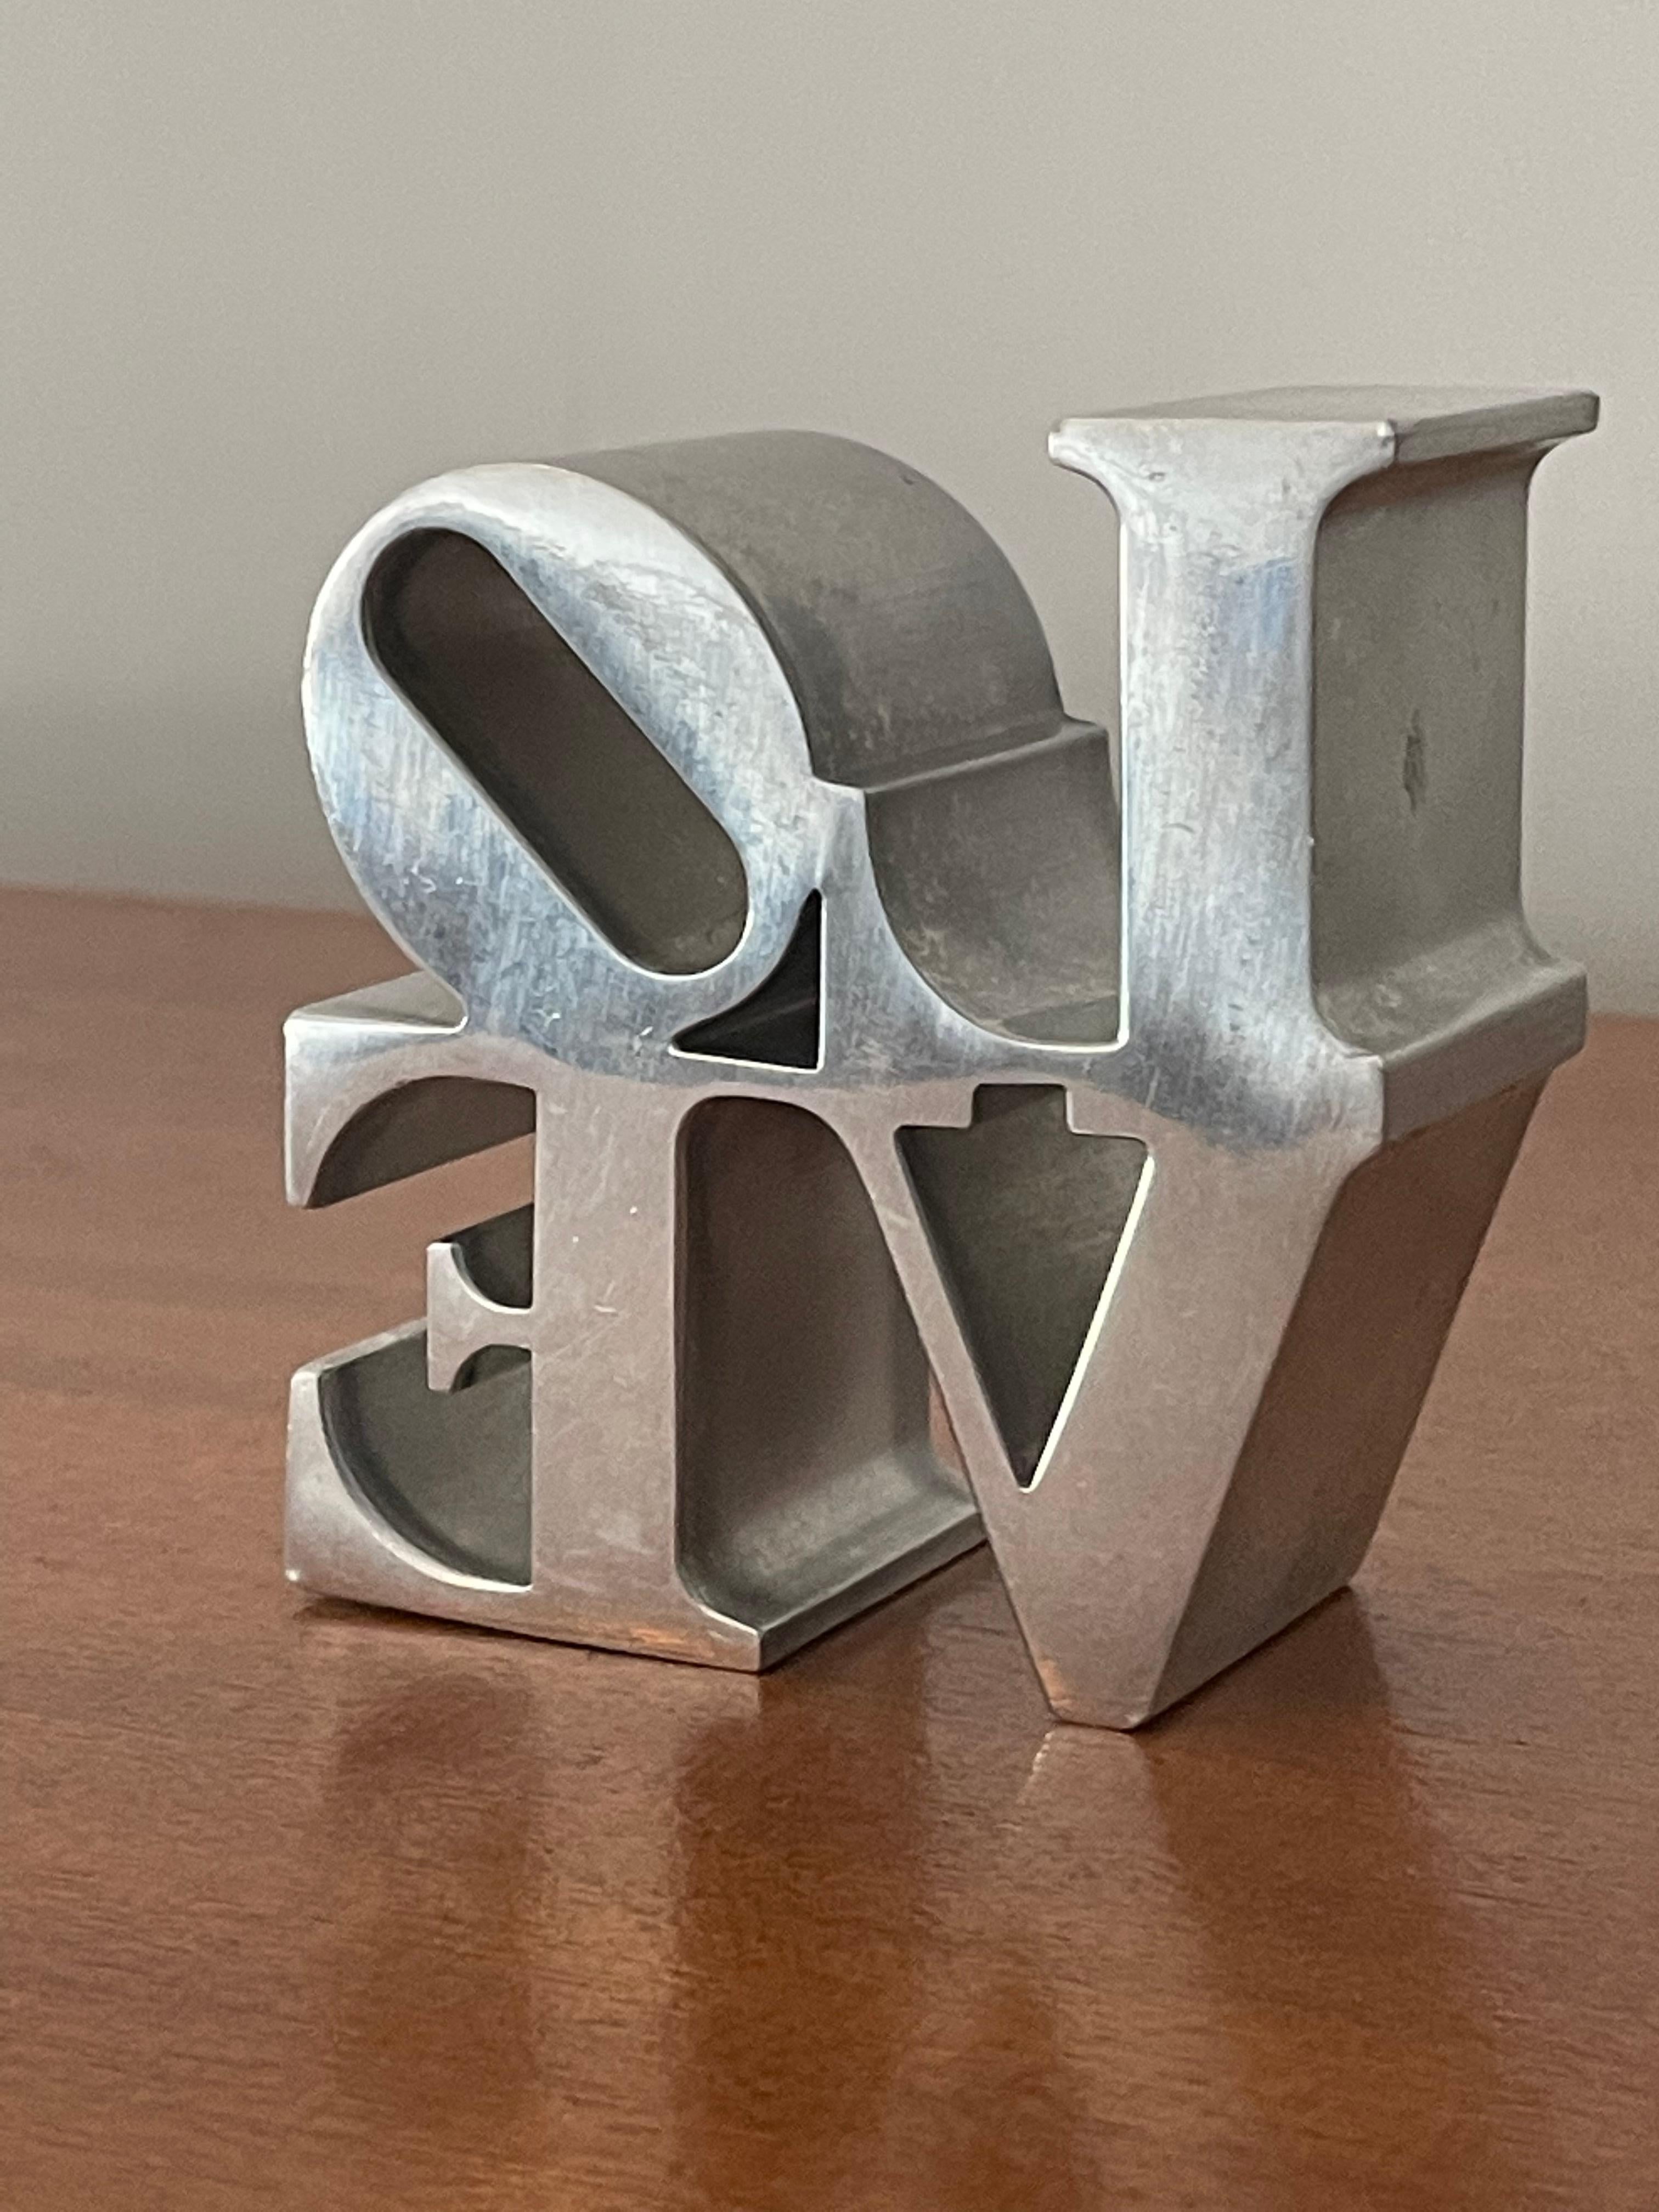 Robert Indiana Love Paperweight or Small Sculpture In Good Condition In St.Petersburg, FL